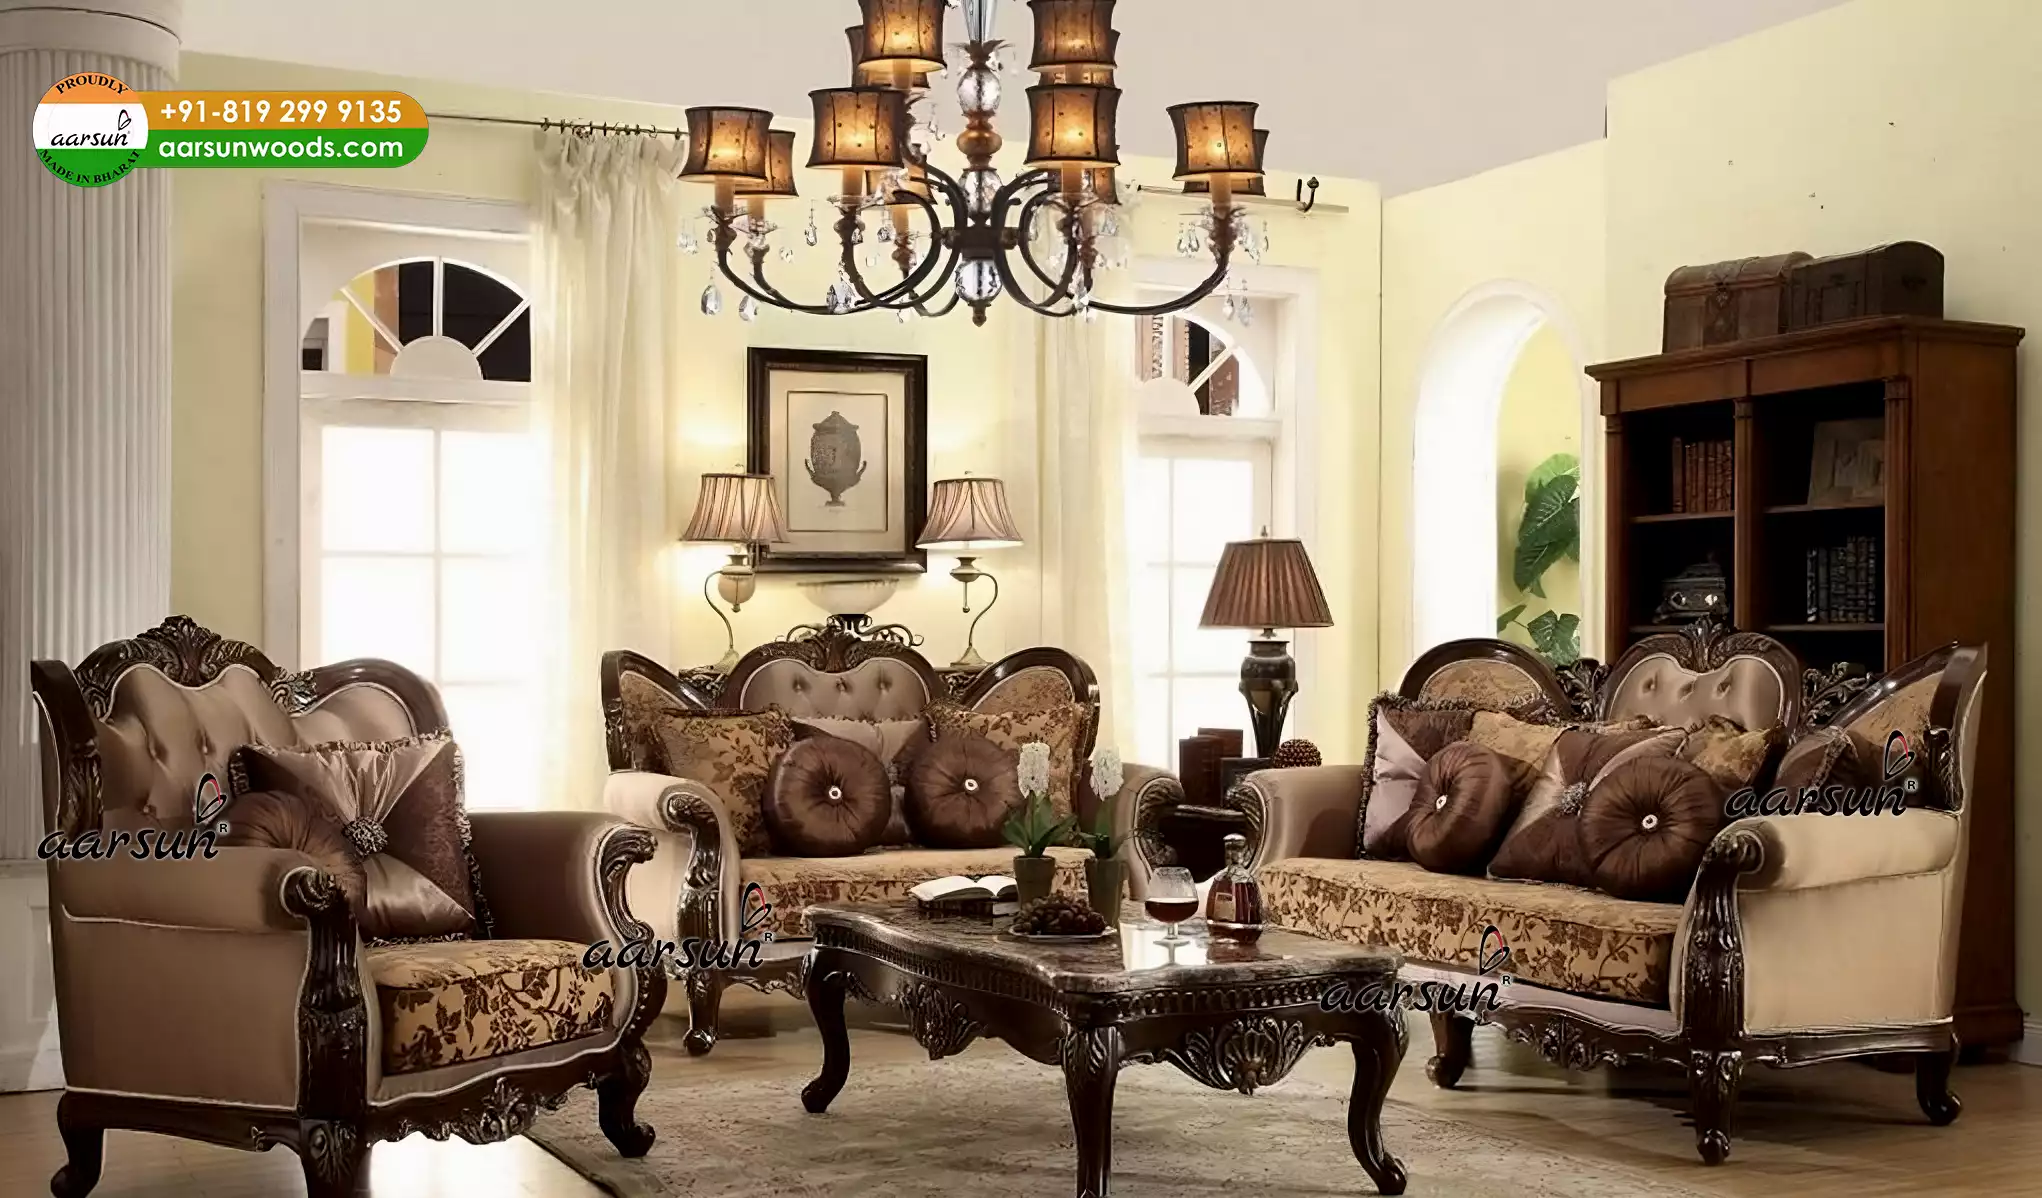 Wooden Handcrafted Sofa Set for Living Room in luxurious fabric and dark walnut finish